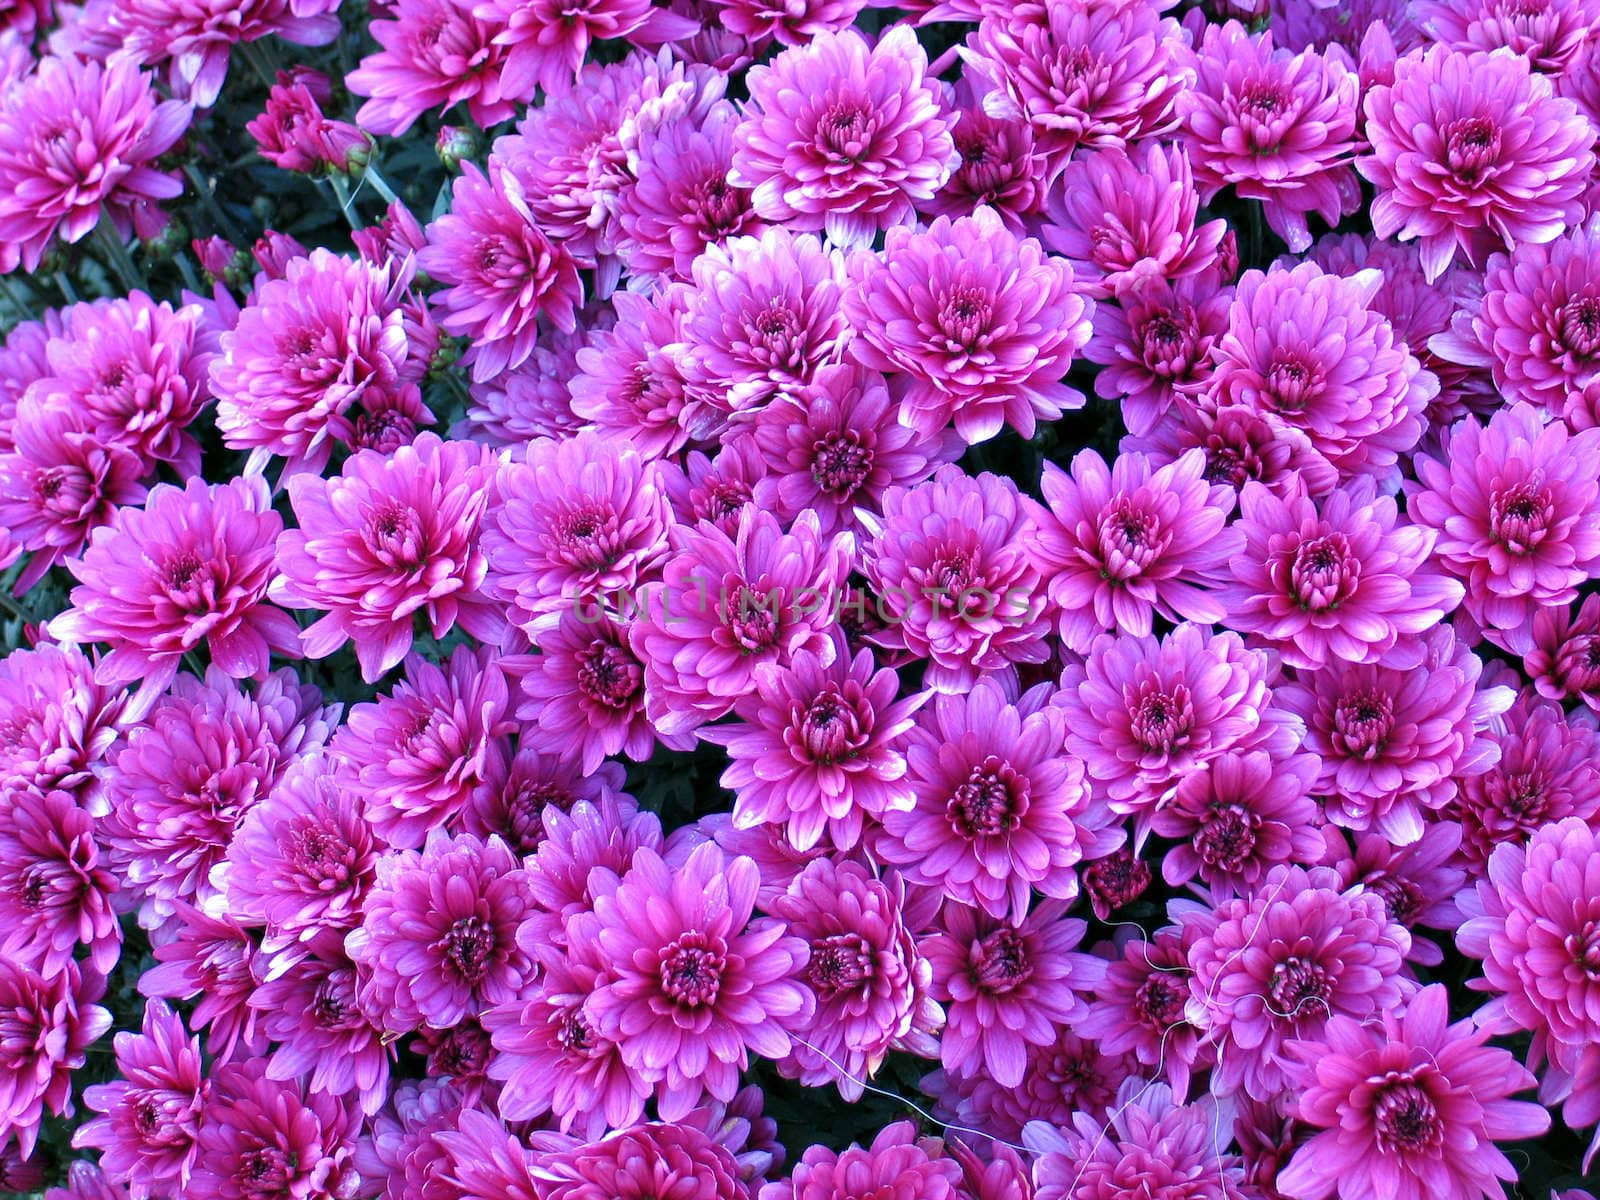 Bed of pink Dahlia blooming flowers - Valentine's Day and wedding favorite